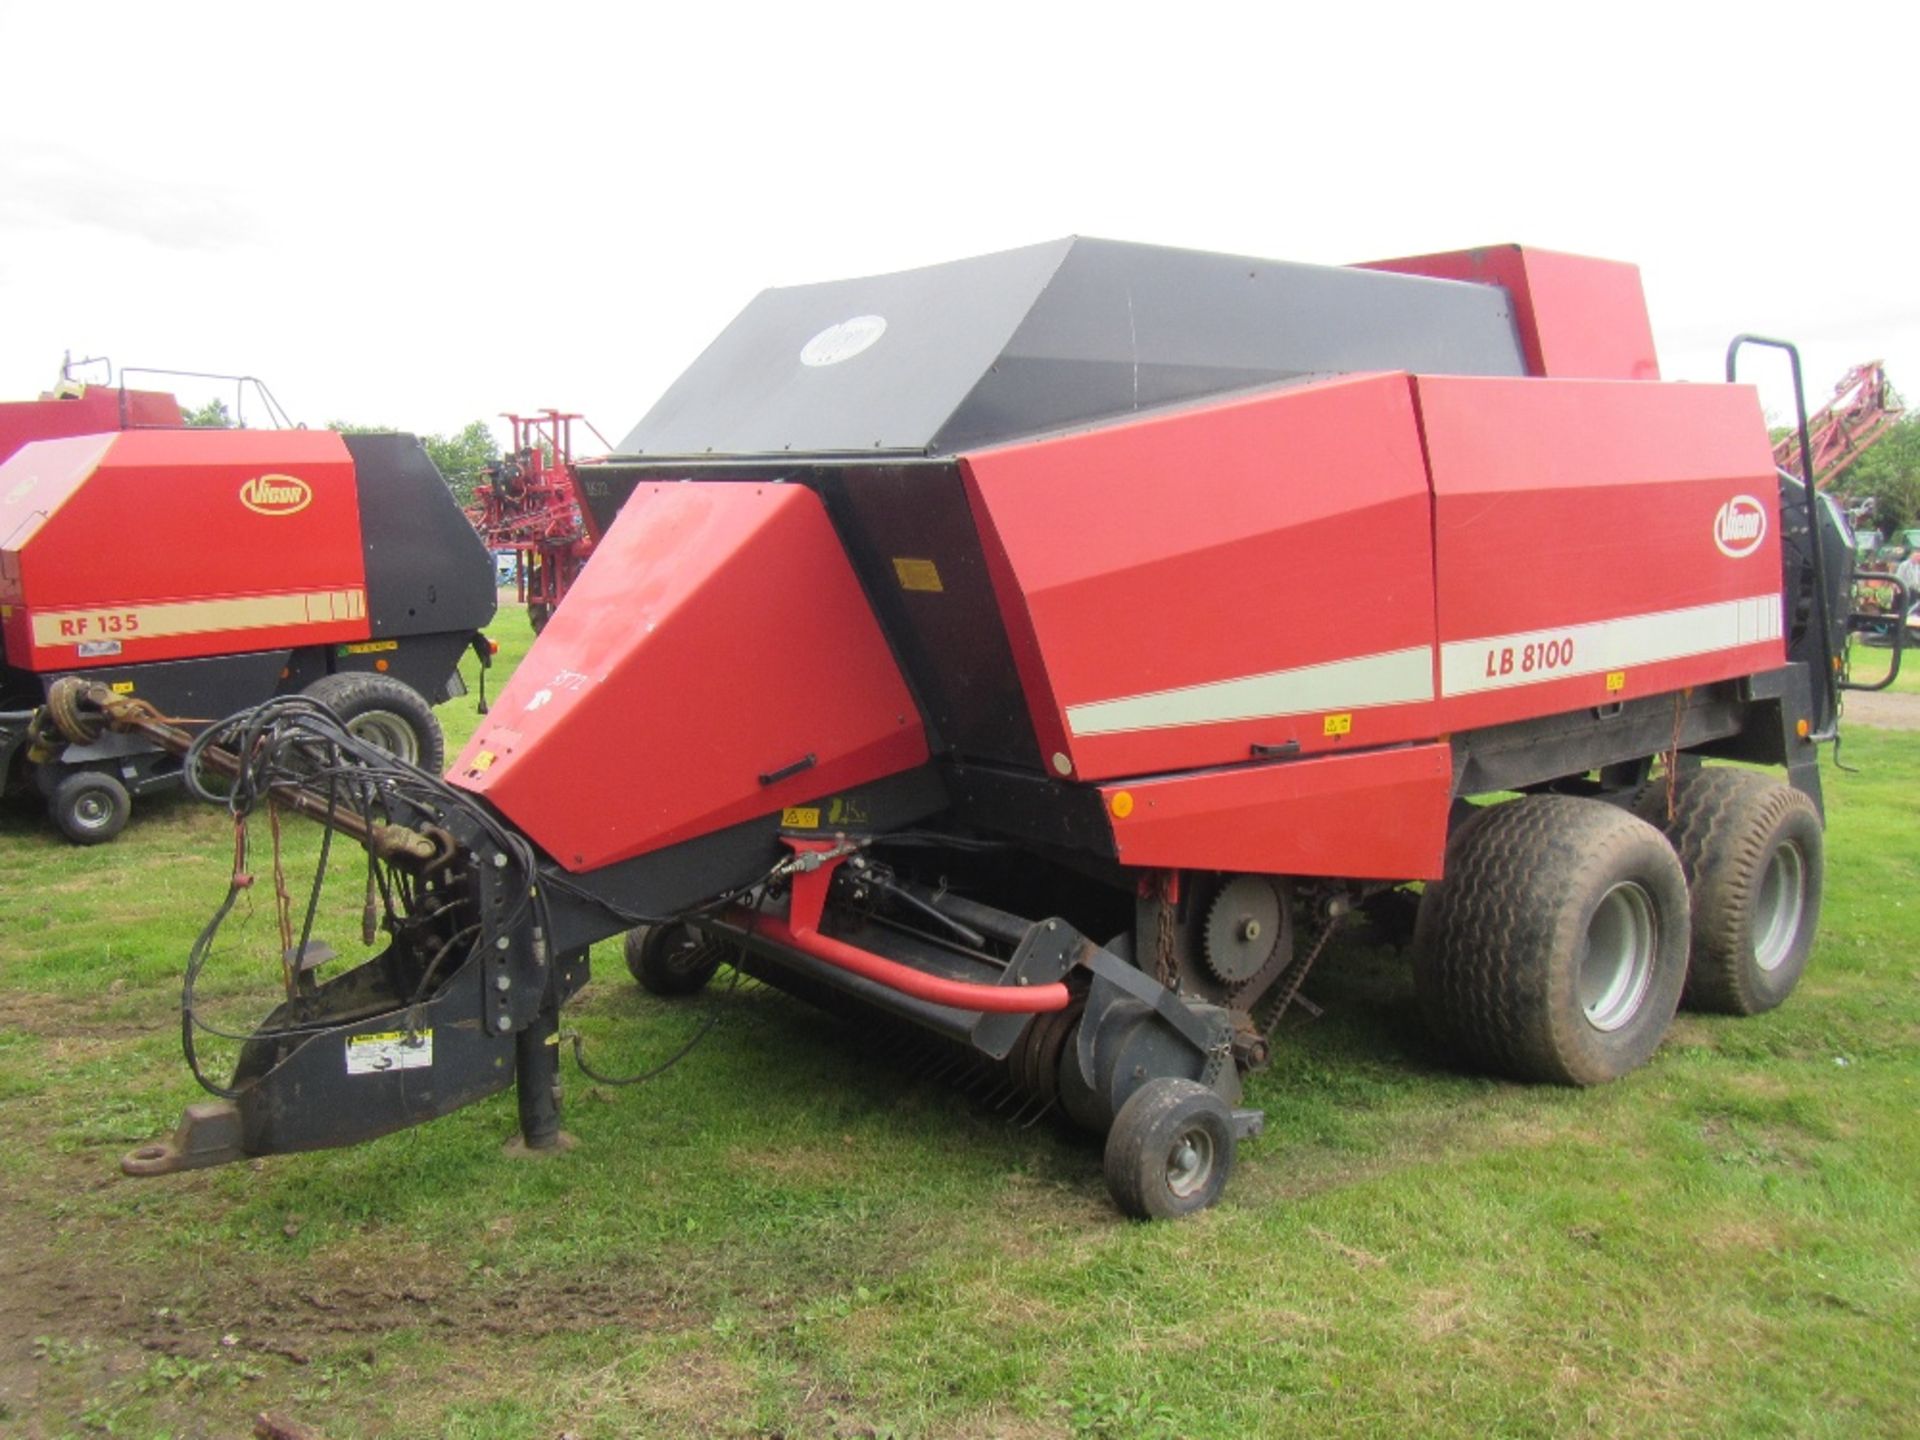 2002 Vicon LB 8100 Square Baler 80x70 bales, tandem axle with brakes, sprung suspension, fast tow, - Image 2 of 6